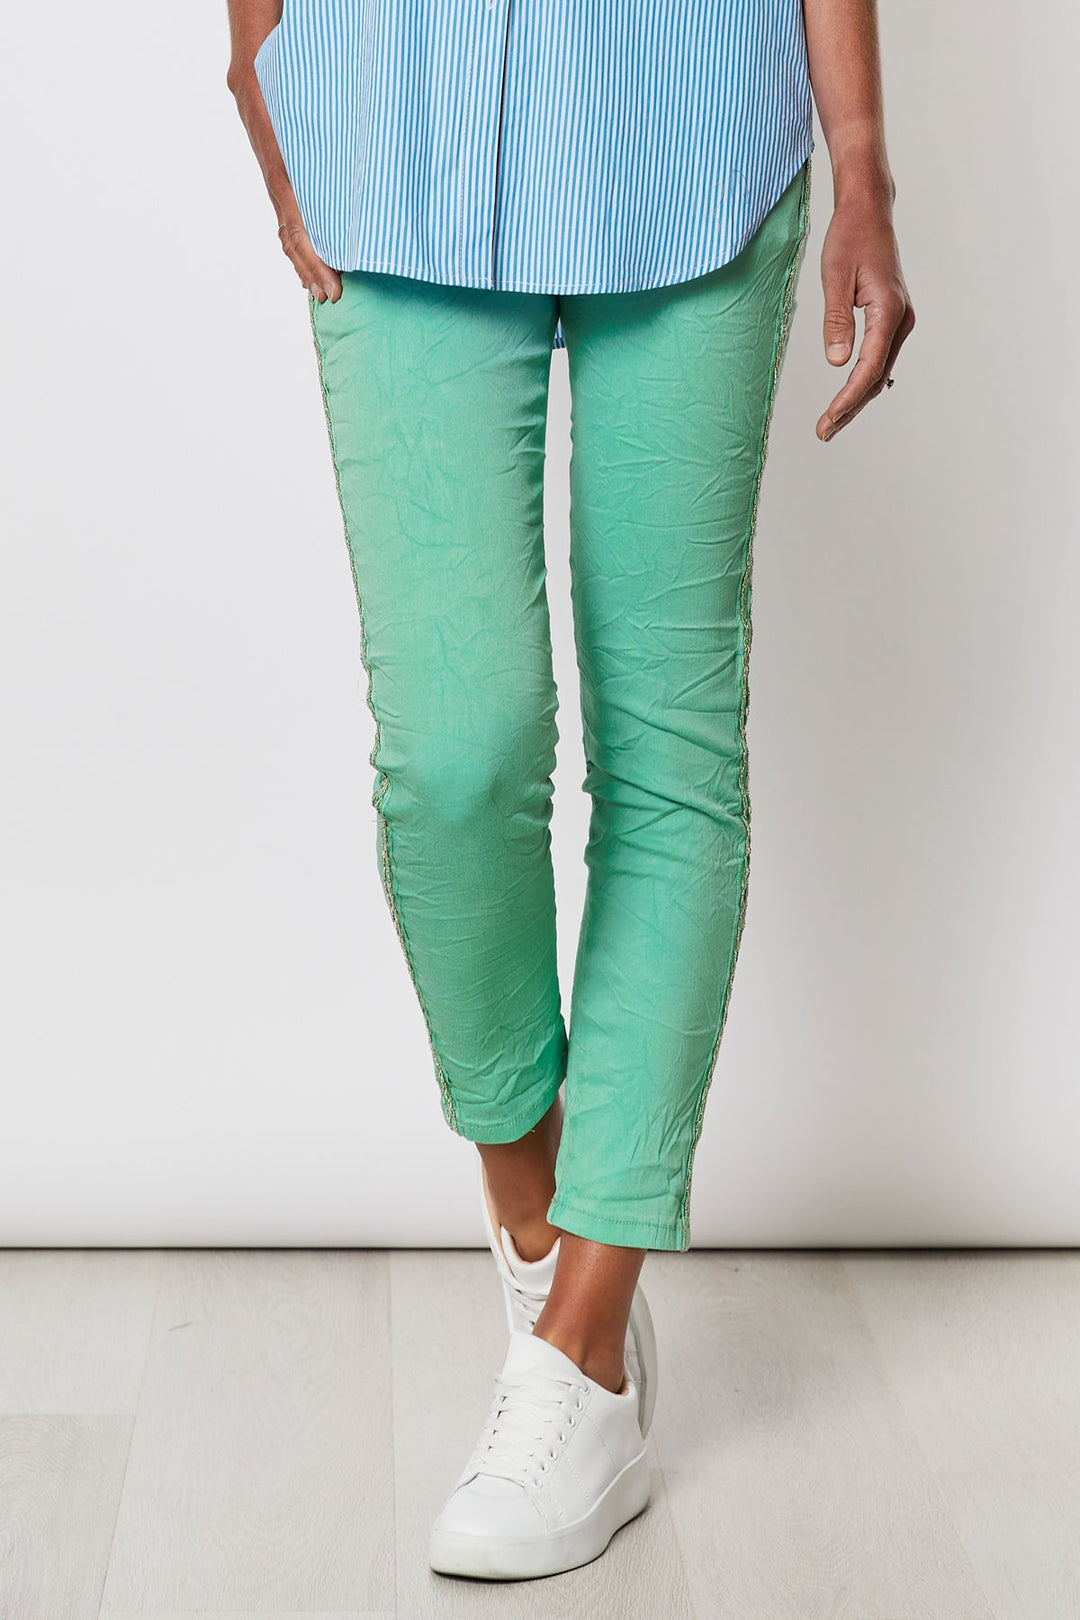 Trim Detail Crushed Jeans | Green | TZ51